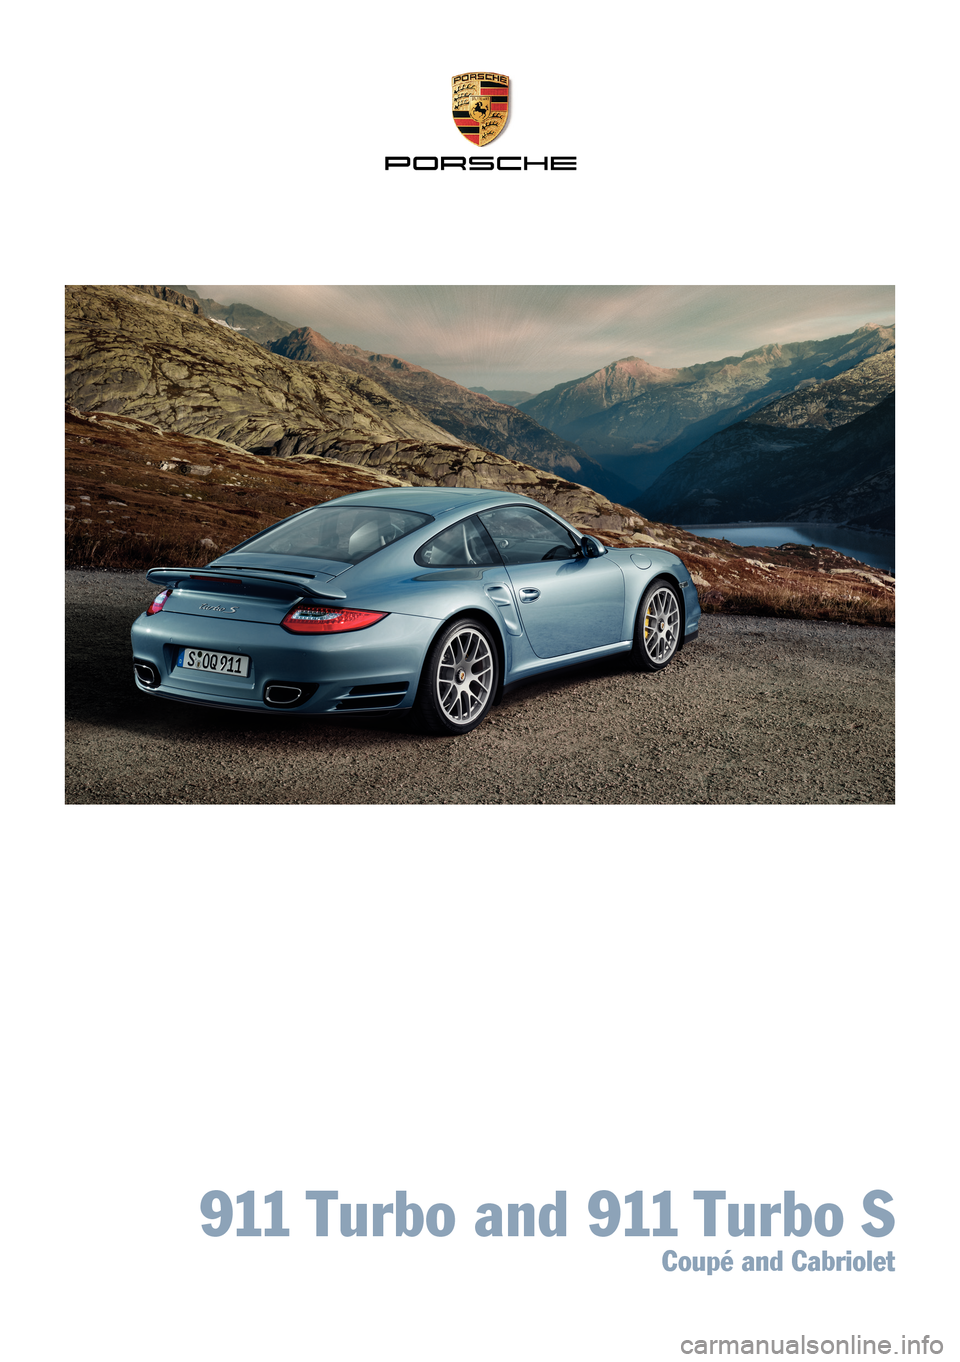 PORSCHE 911 2009 5.G Information Manual 911  Turbo and 9 11  Turbo S  
Coupé and Cabriolet 